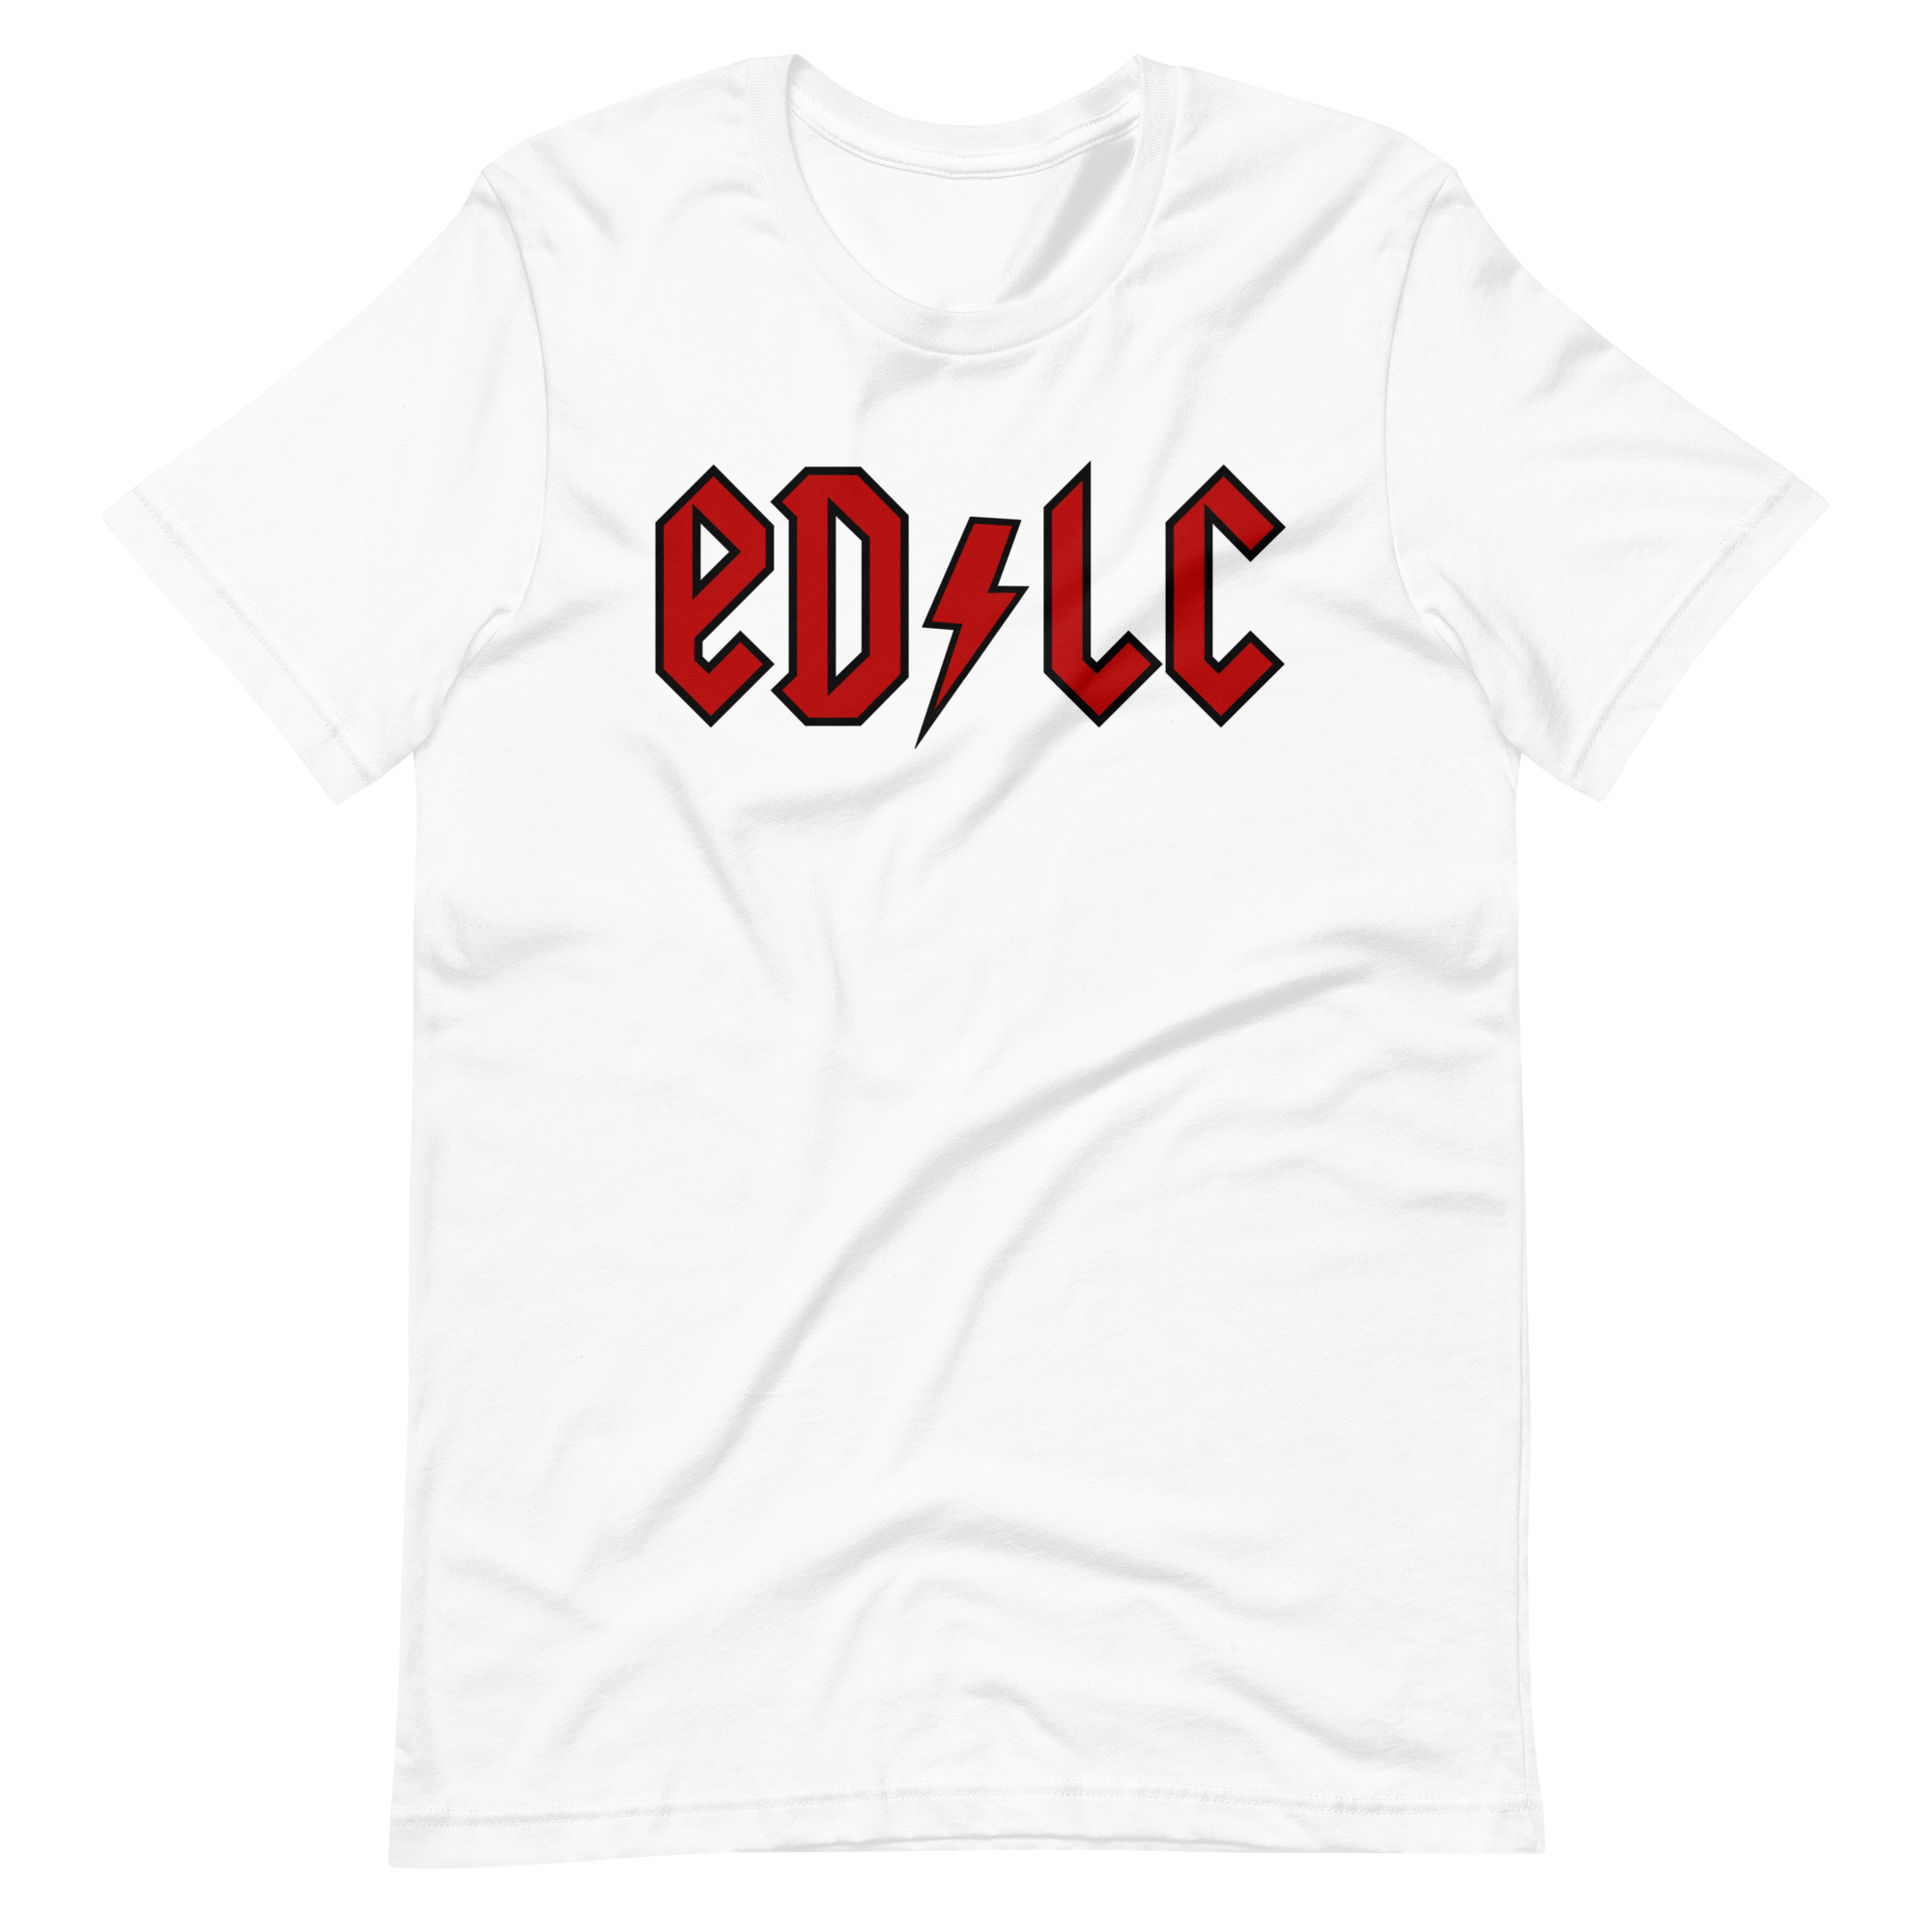 EDLC: Electric Red